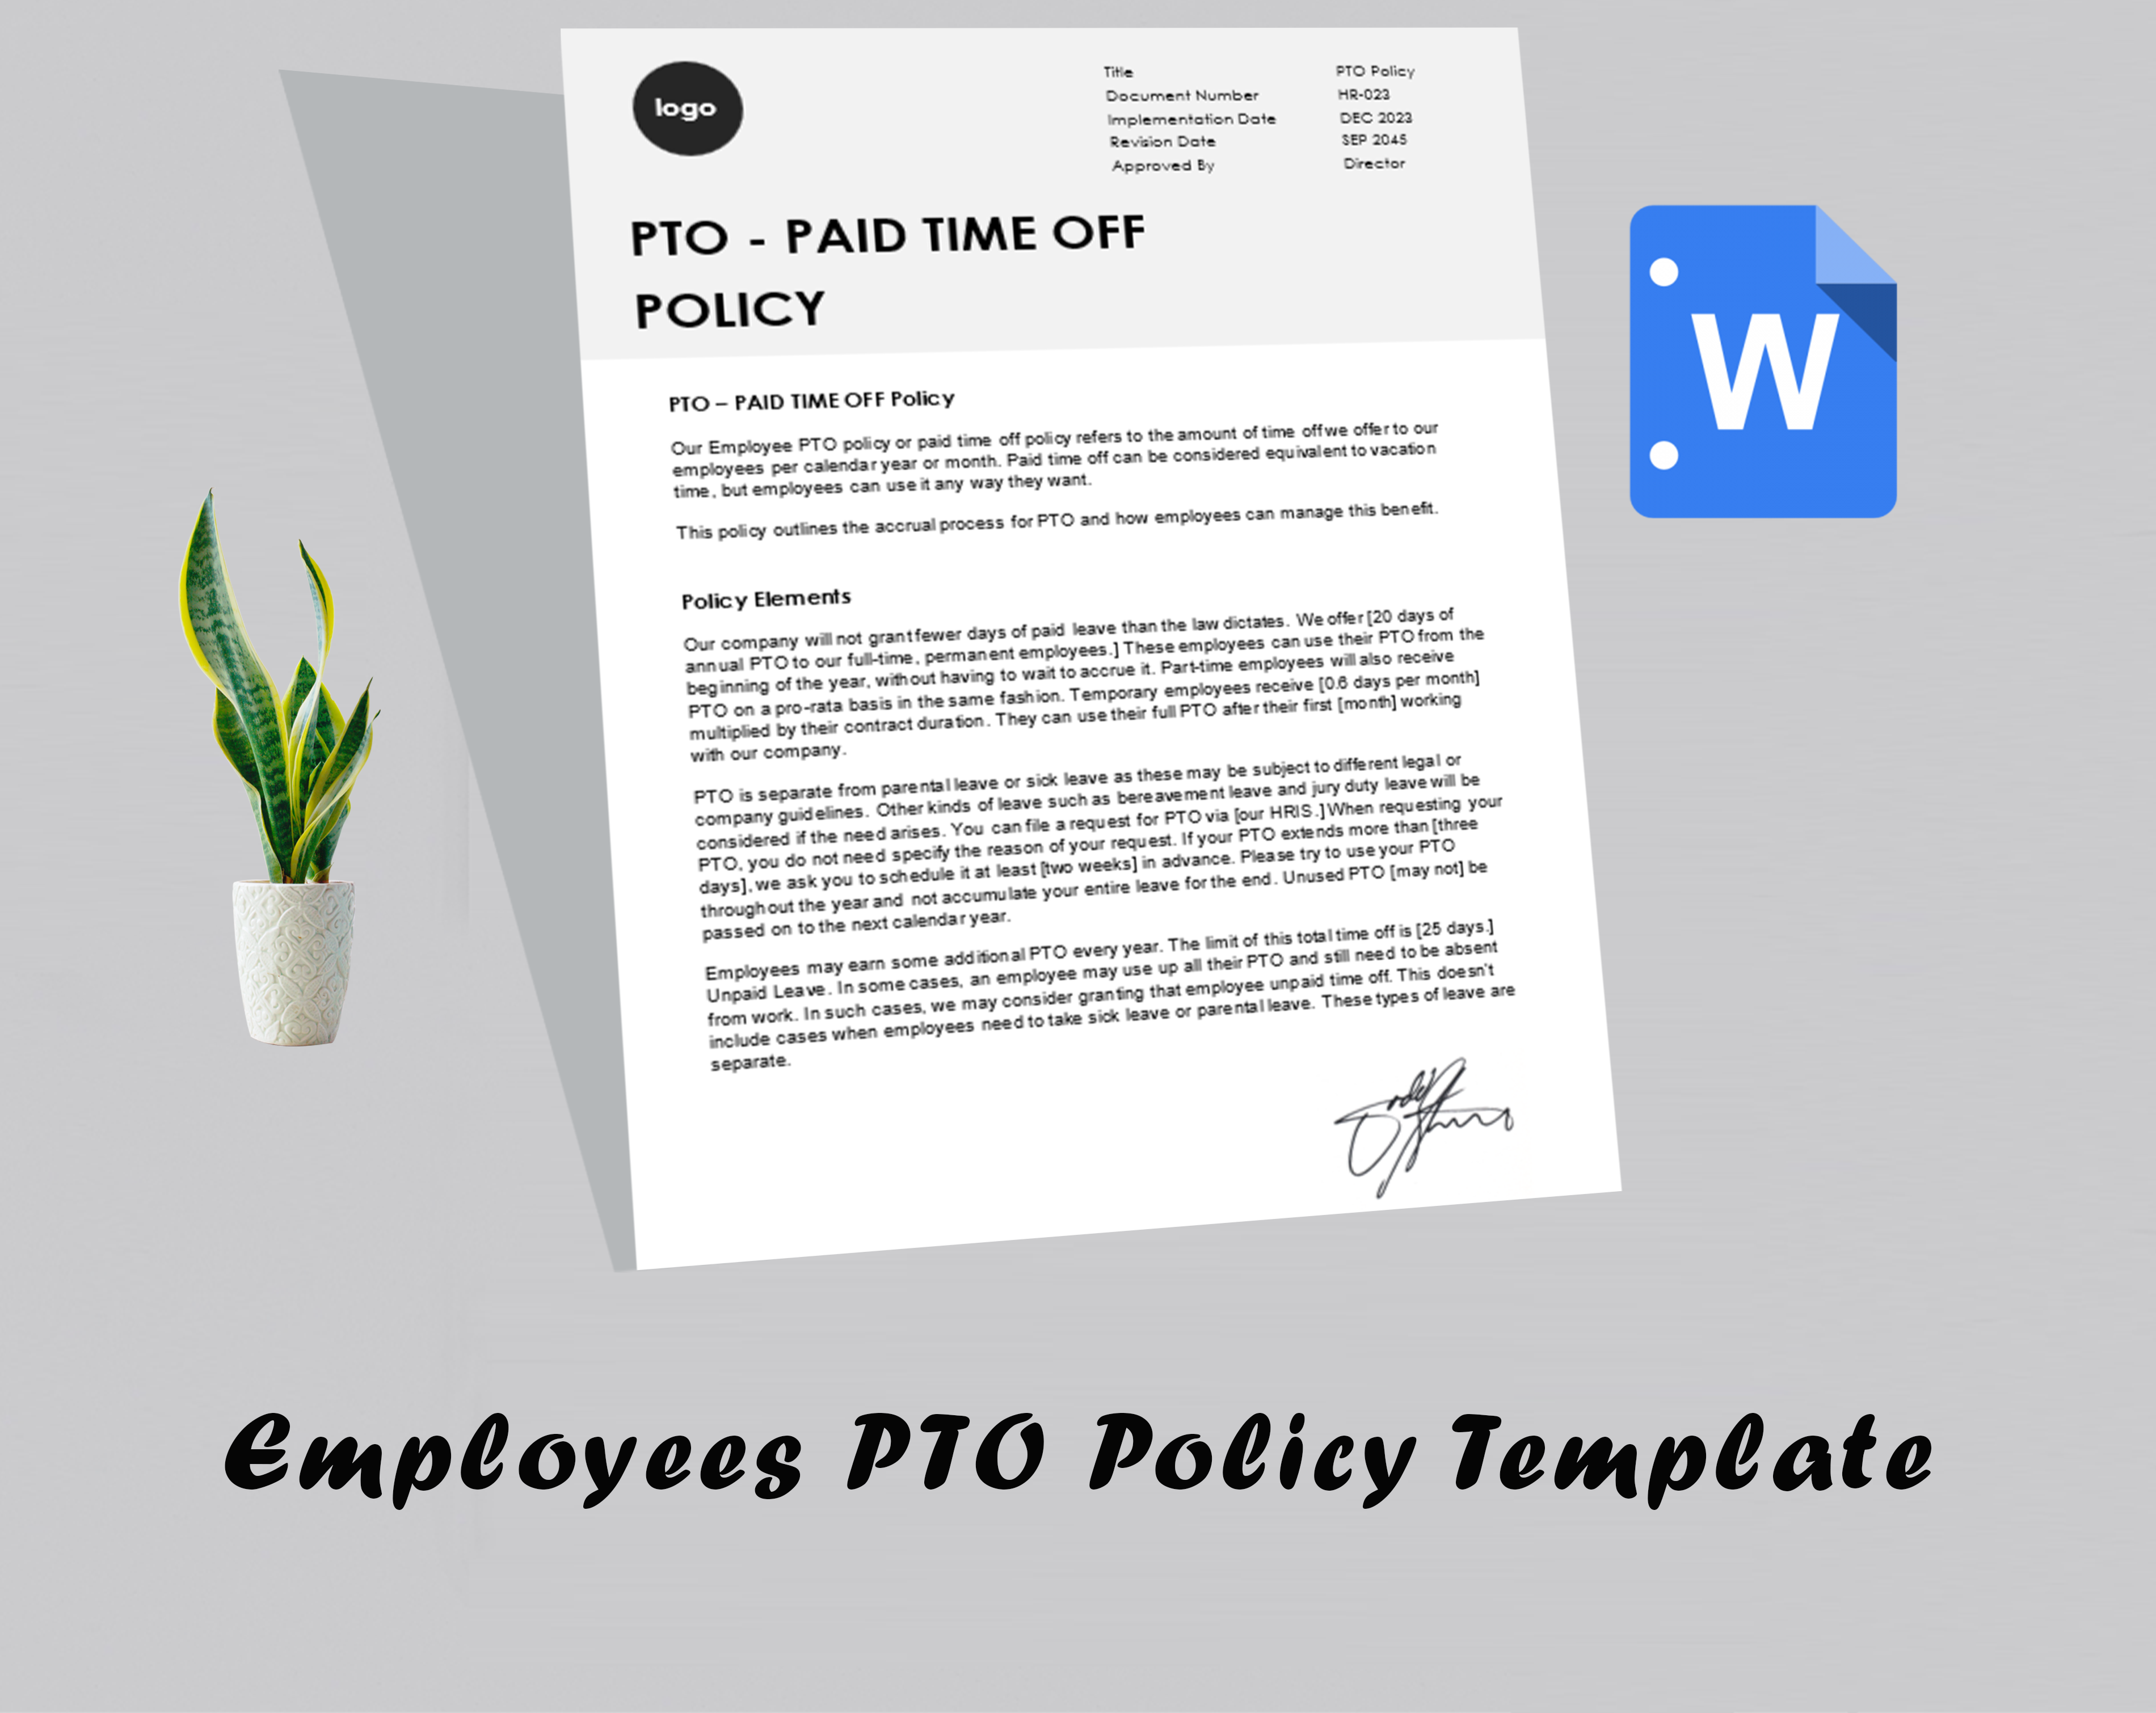 Employees PTO Policy Template